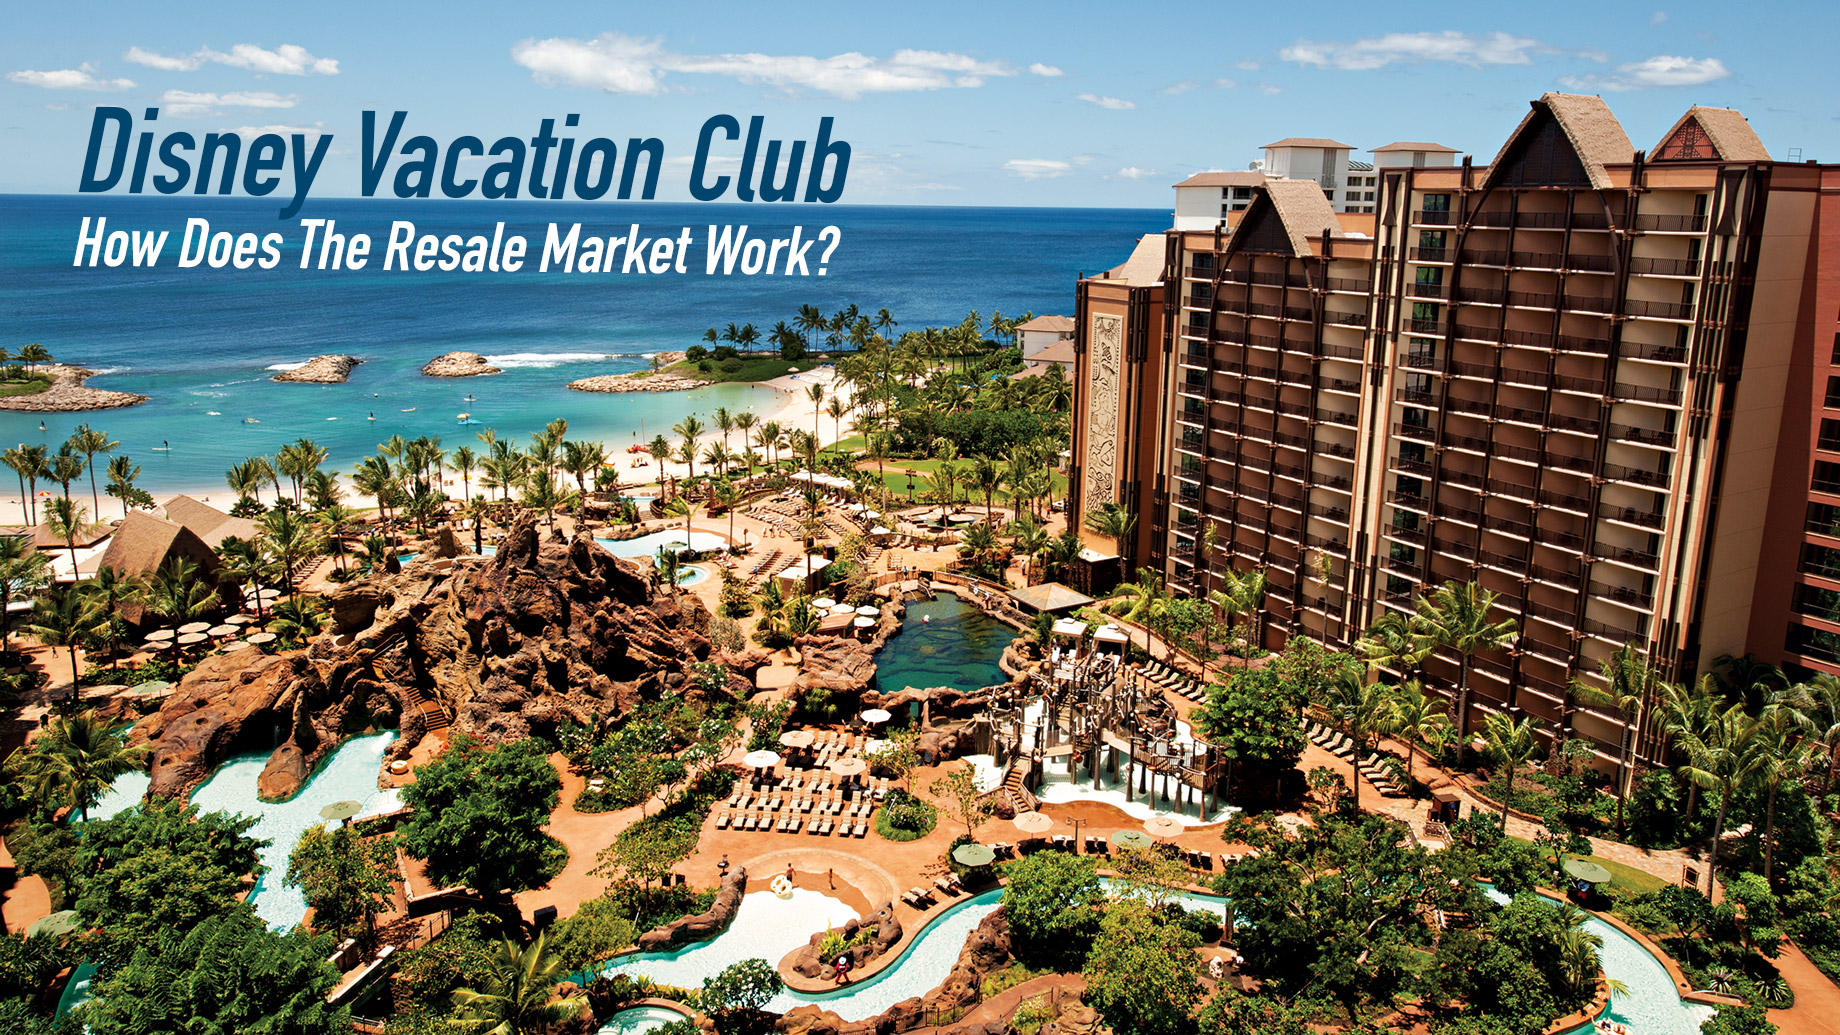 How Does The Disney Vacation Club (DVC) Resale Market Work?